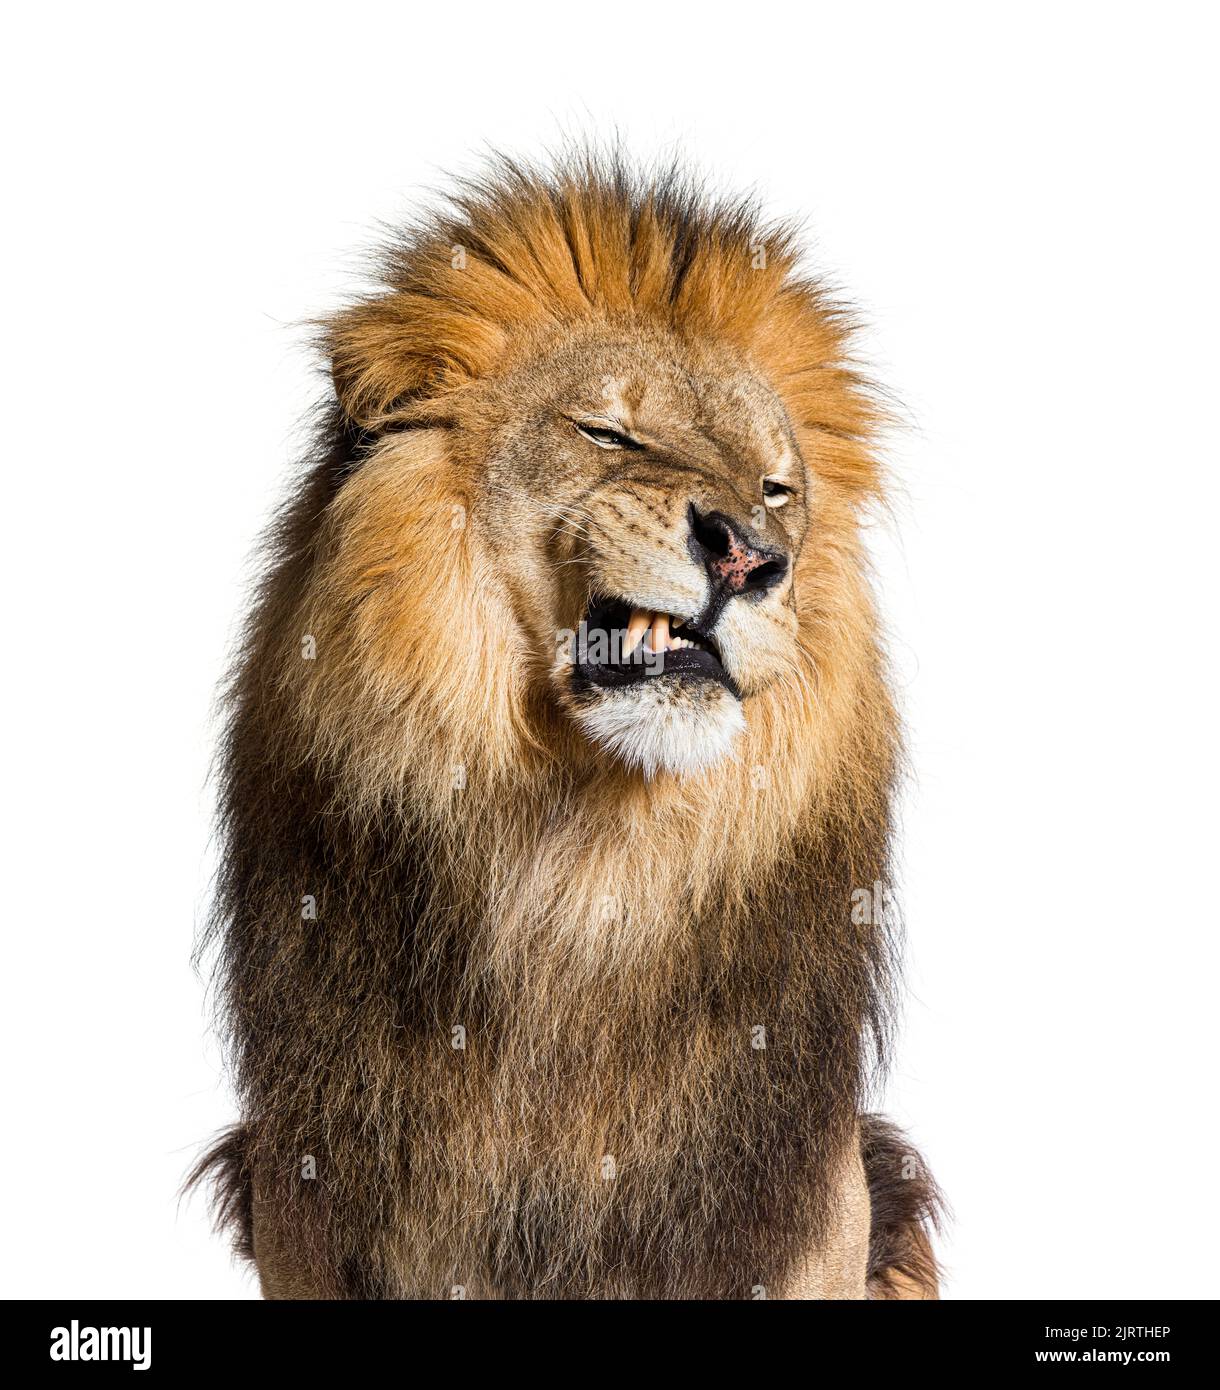 Lion pulling a face, looking at the camera and showing its teeth, isolated on white Stock Photo